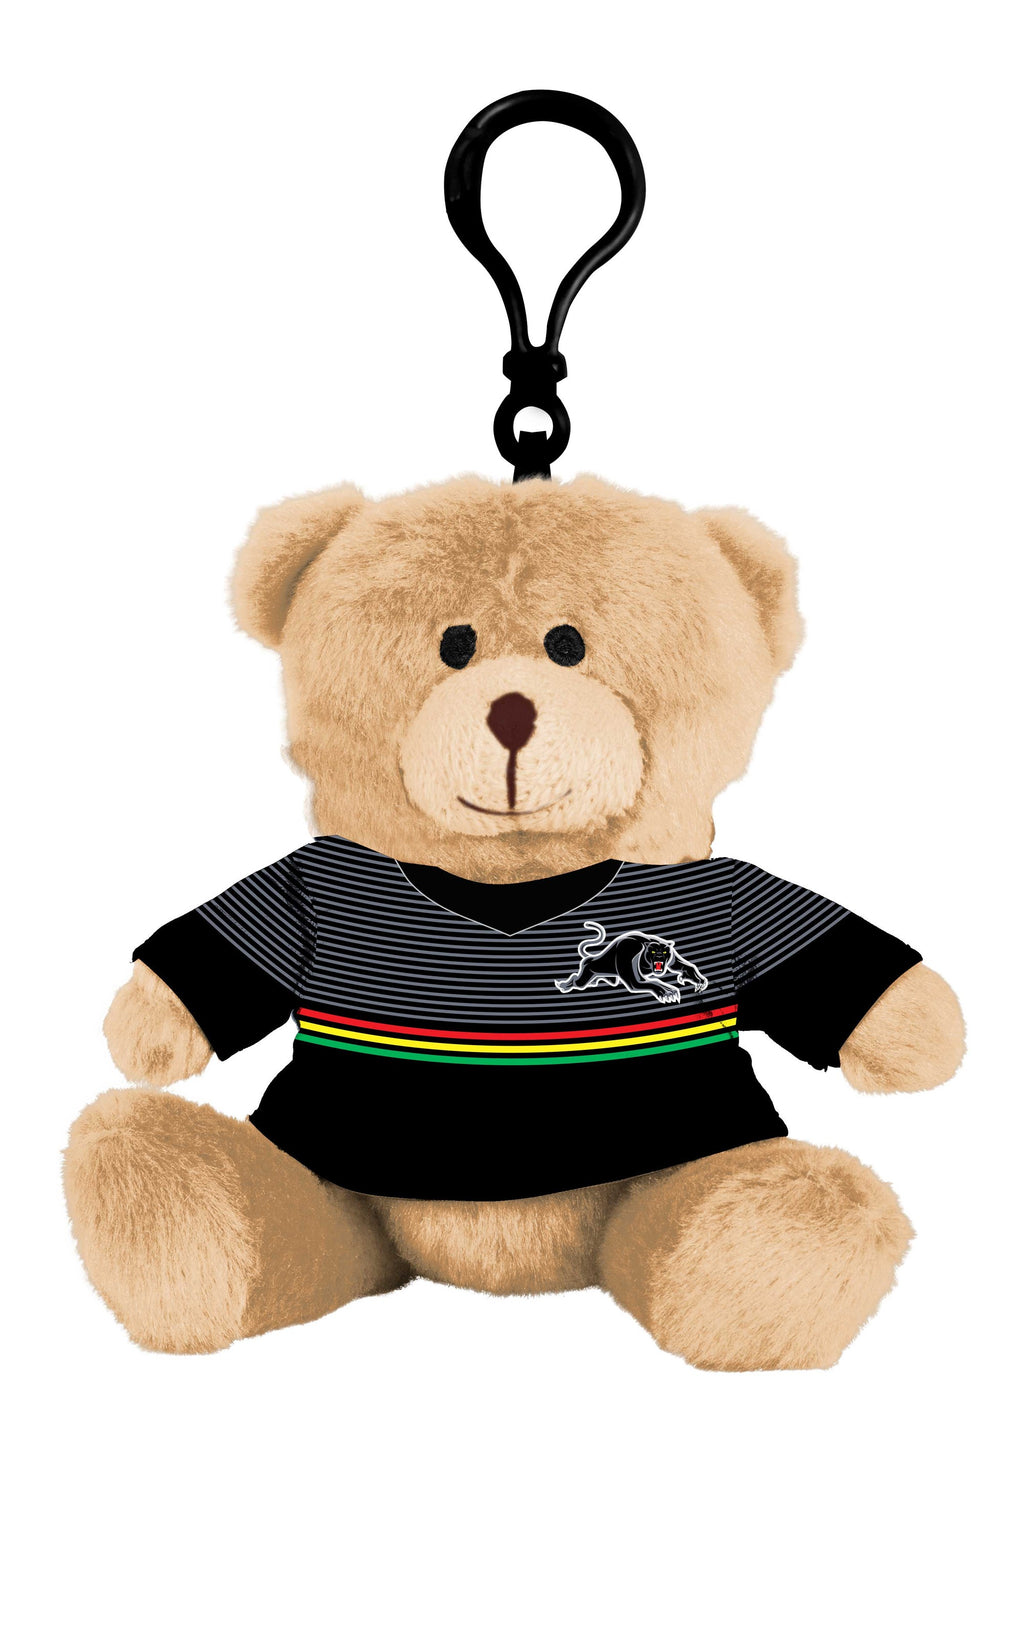 Penrith Panthers Teddy Bag Clip